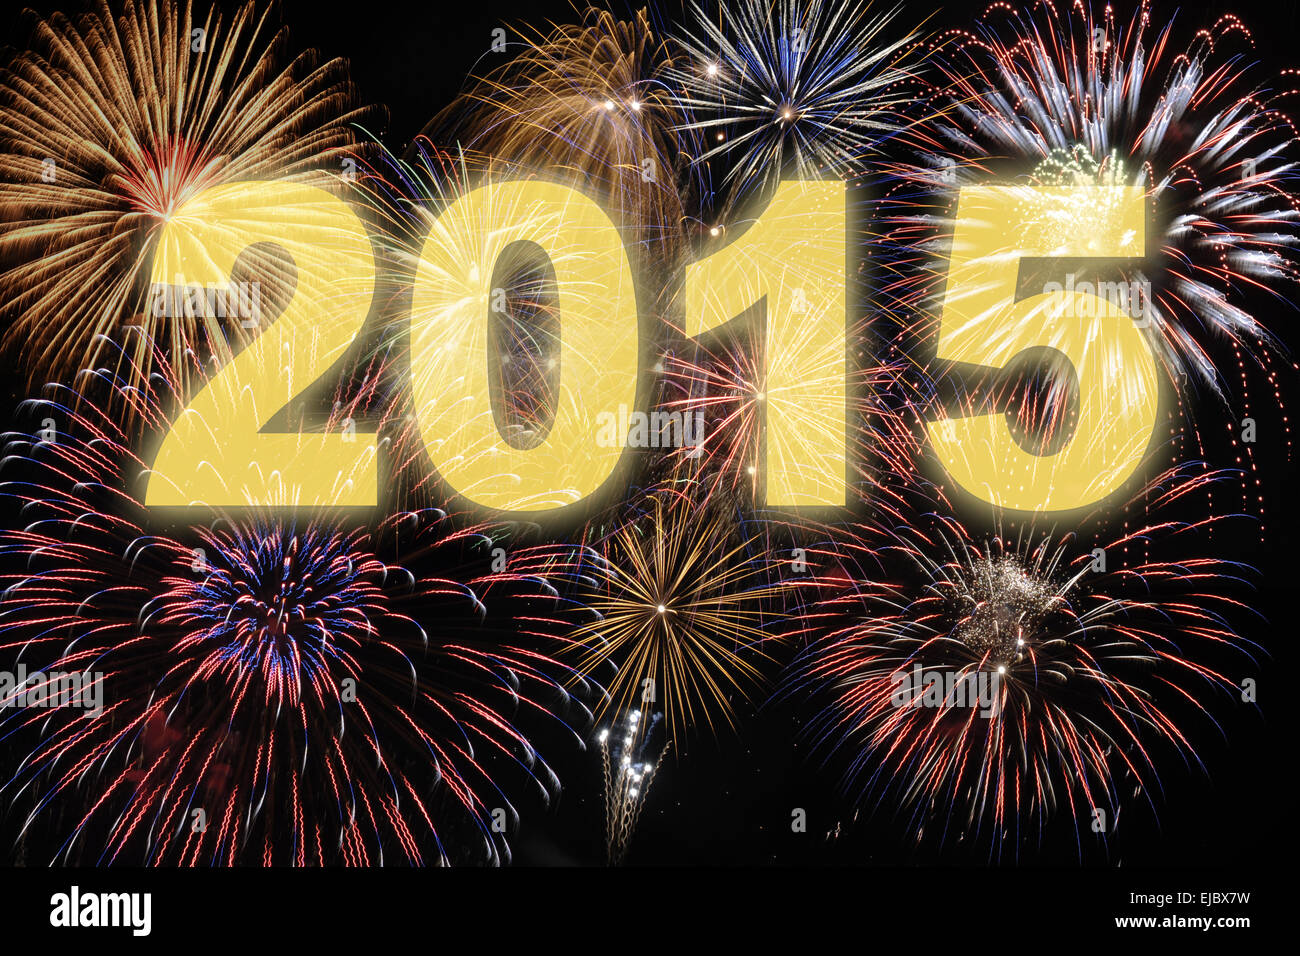 happy new year 2015 with firework Stock Photo